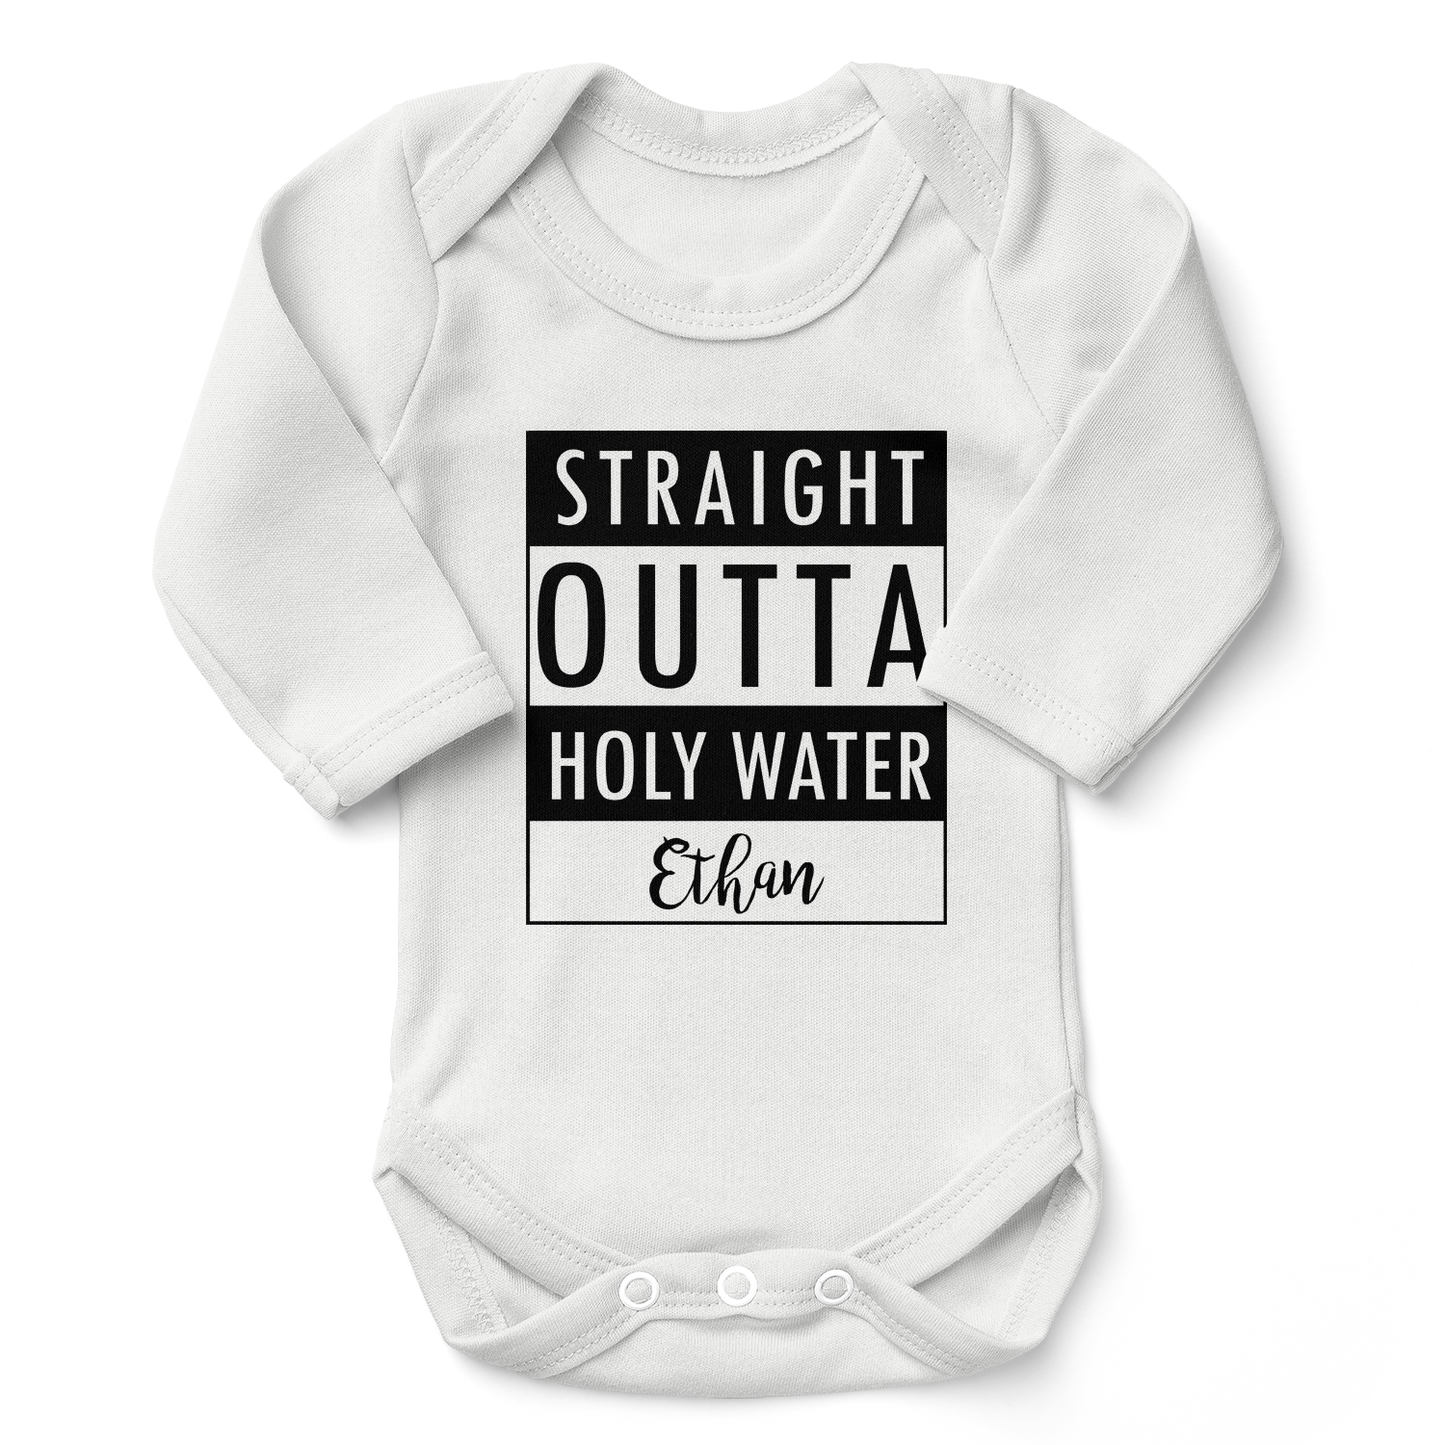 [Personalized] Endanzoo Organic Baby Bodysuit - Straight Outta Holy Water Baptism / Christening Day (White)